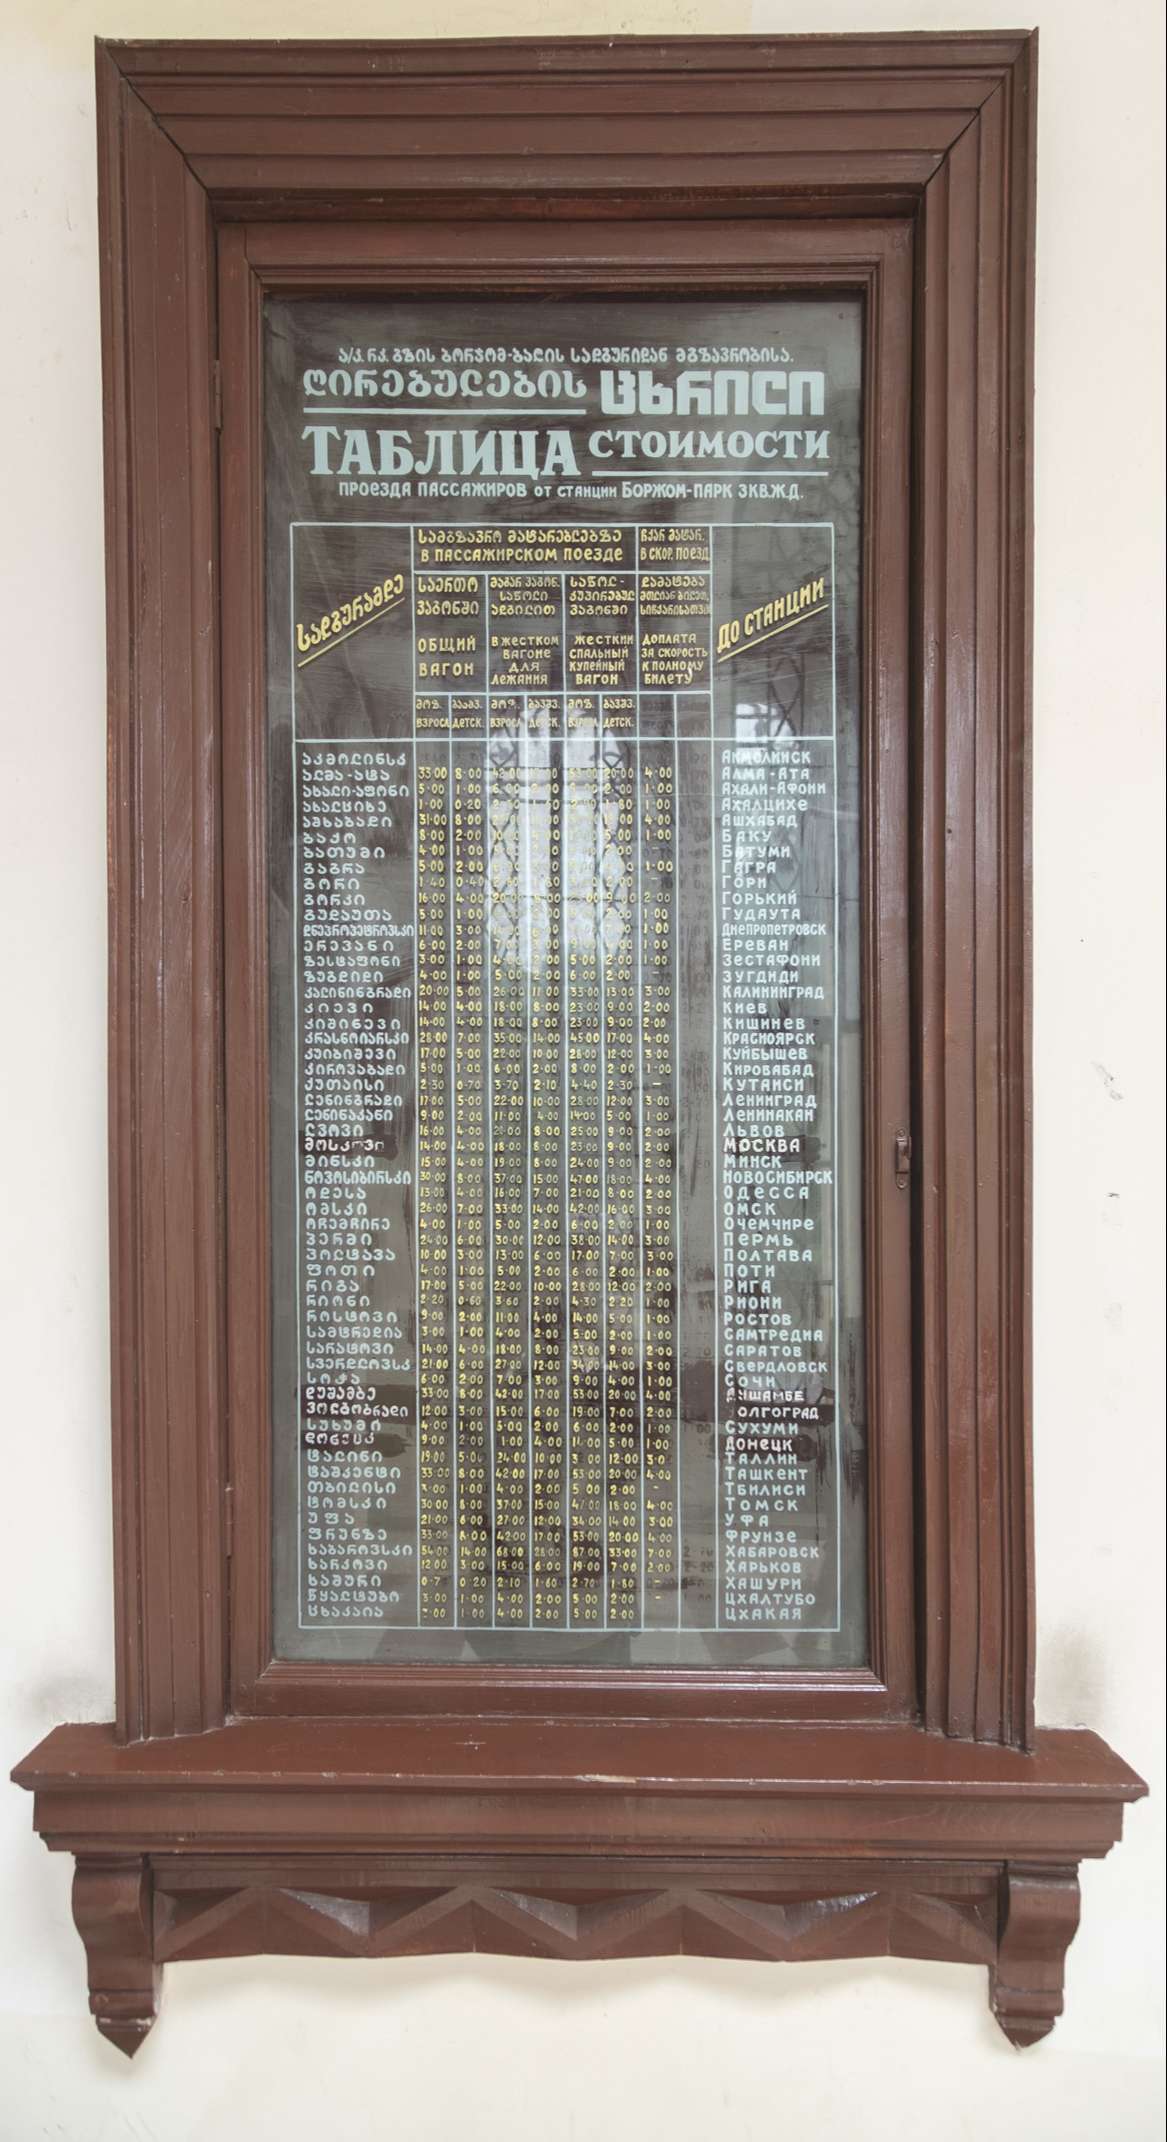 A timetable in the old train station in Borjomi, Old train station in Borjomi, Samtskhe-Javakheti